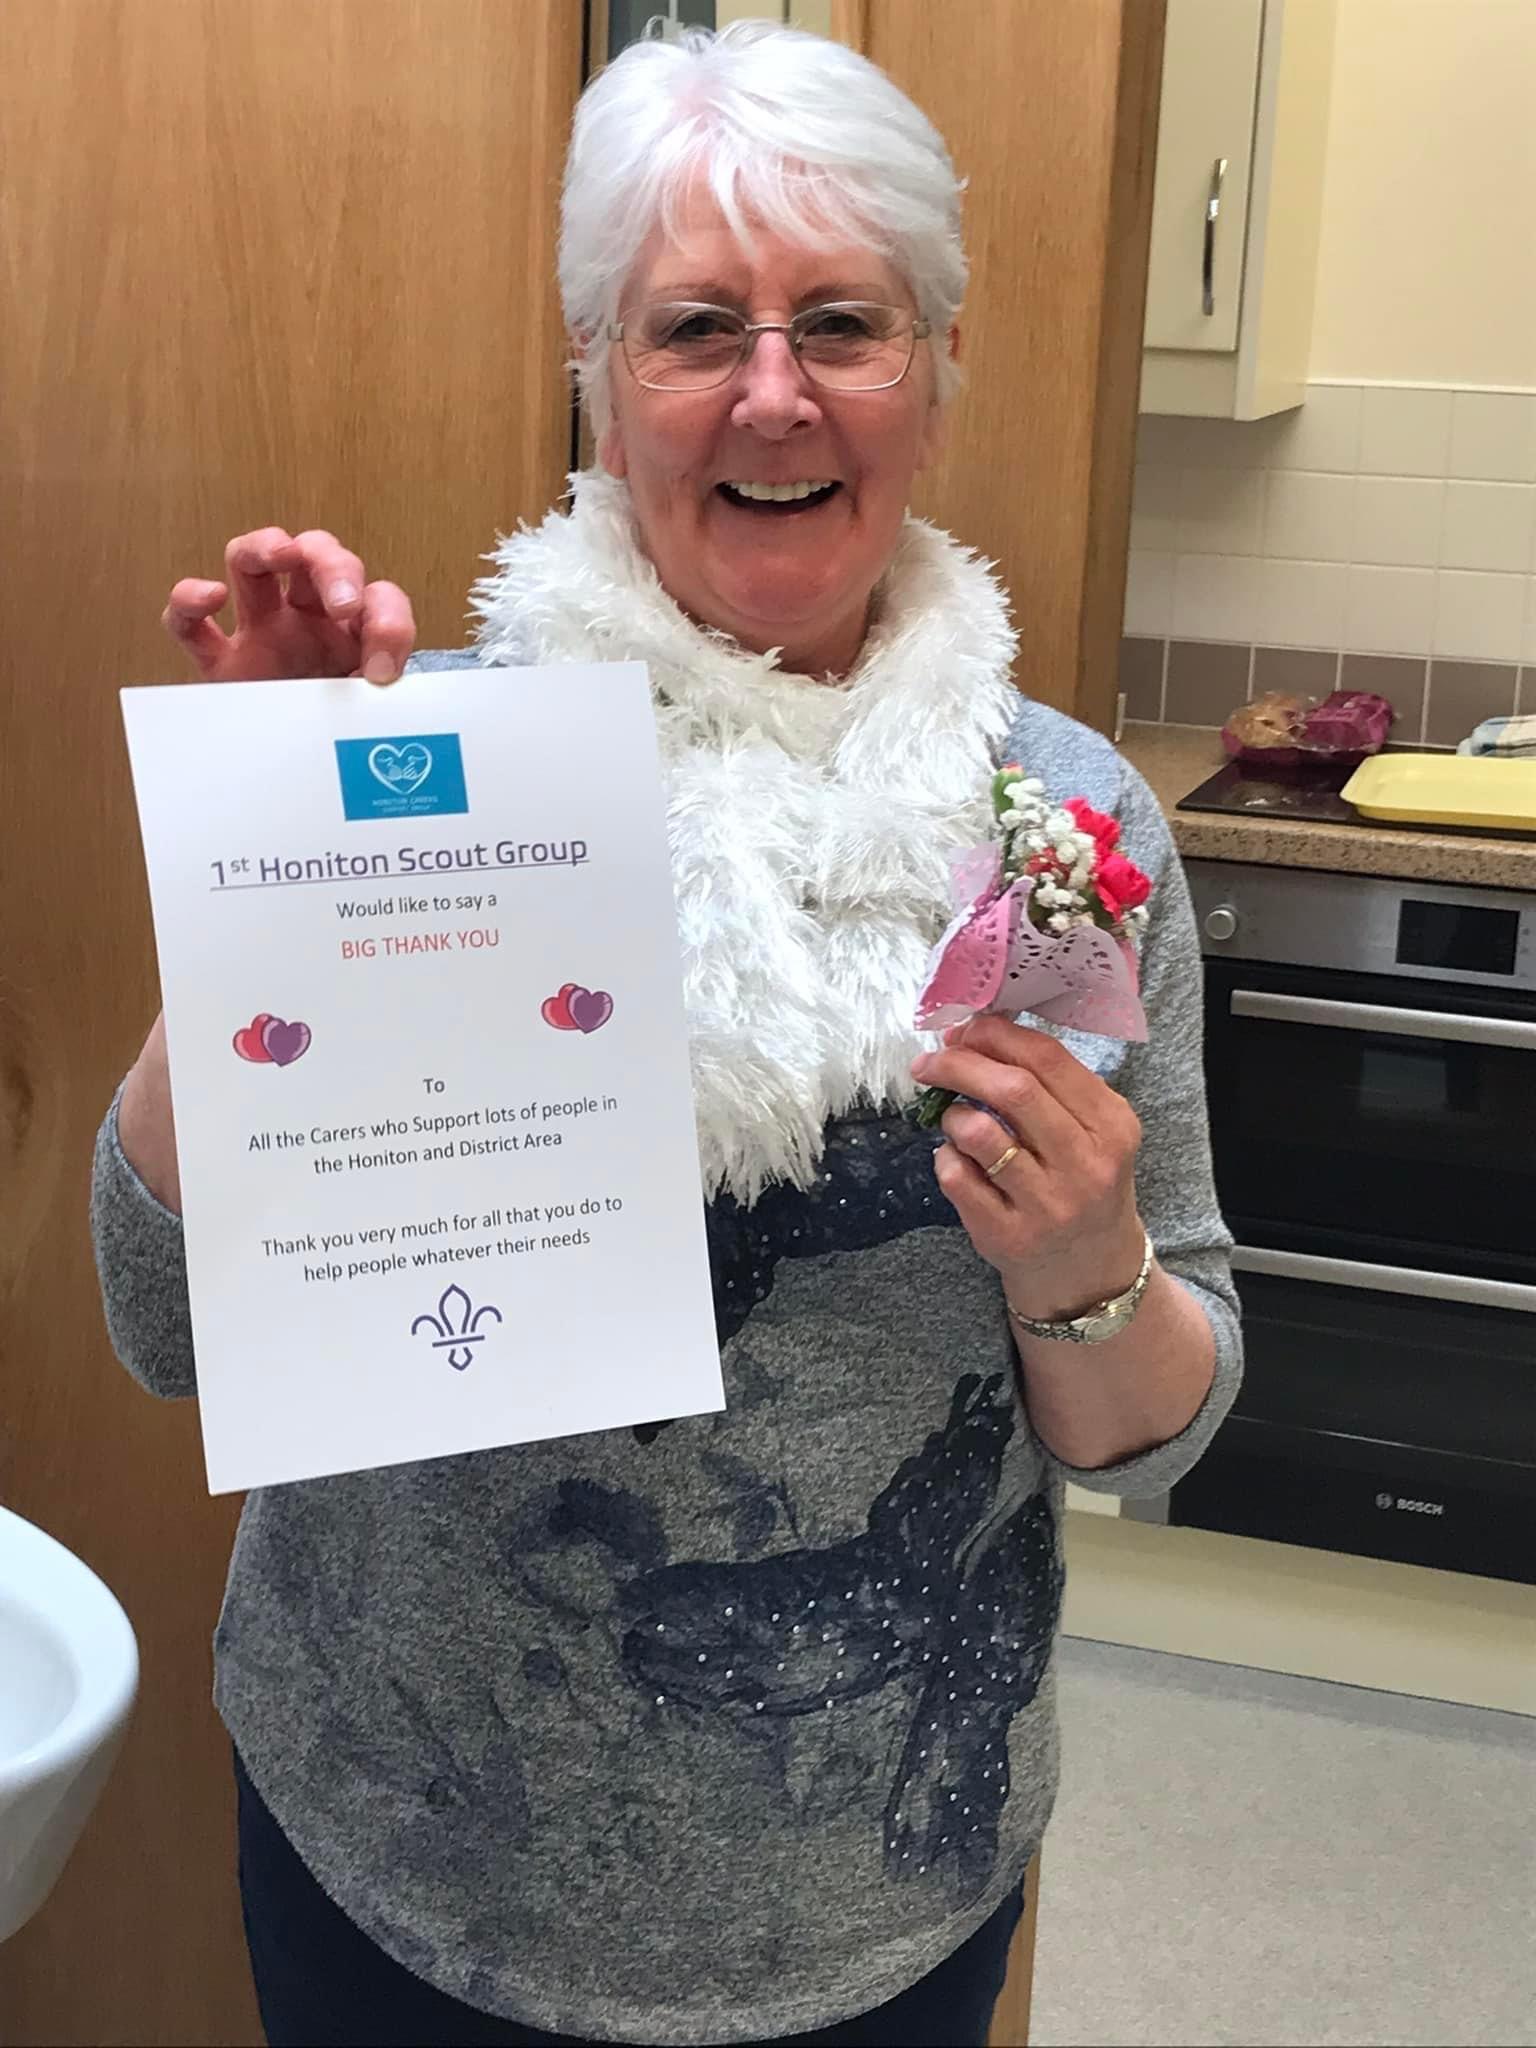 Val smiling at the camera and holding the carers certificate and small bunch of flowers given to each carer